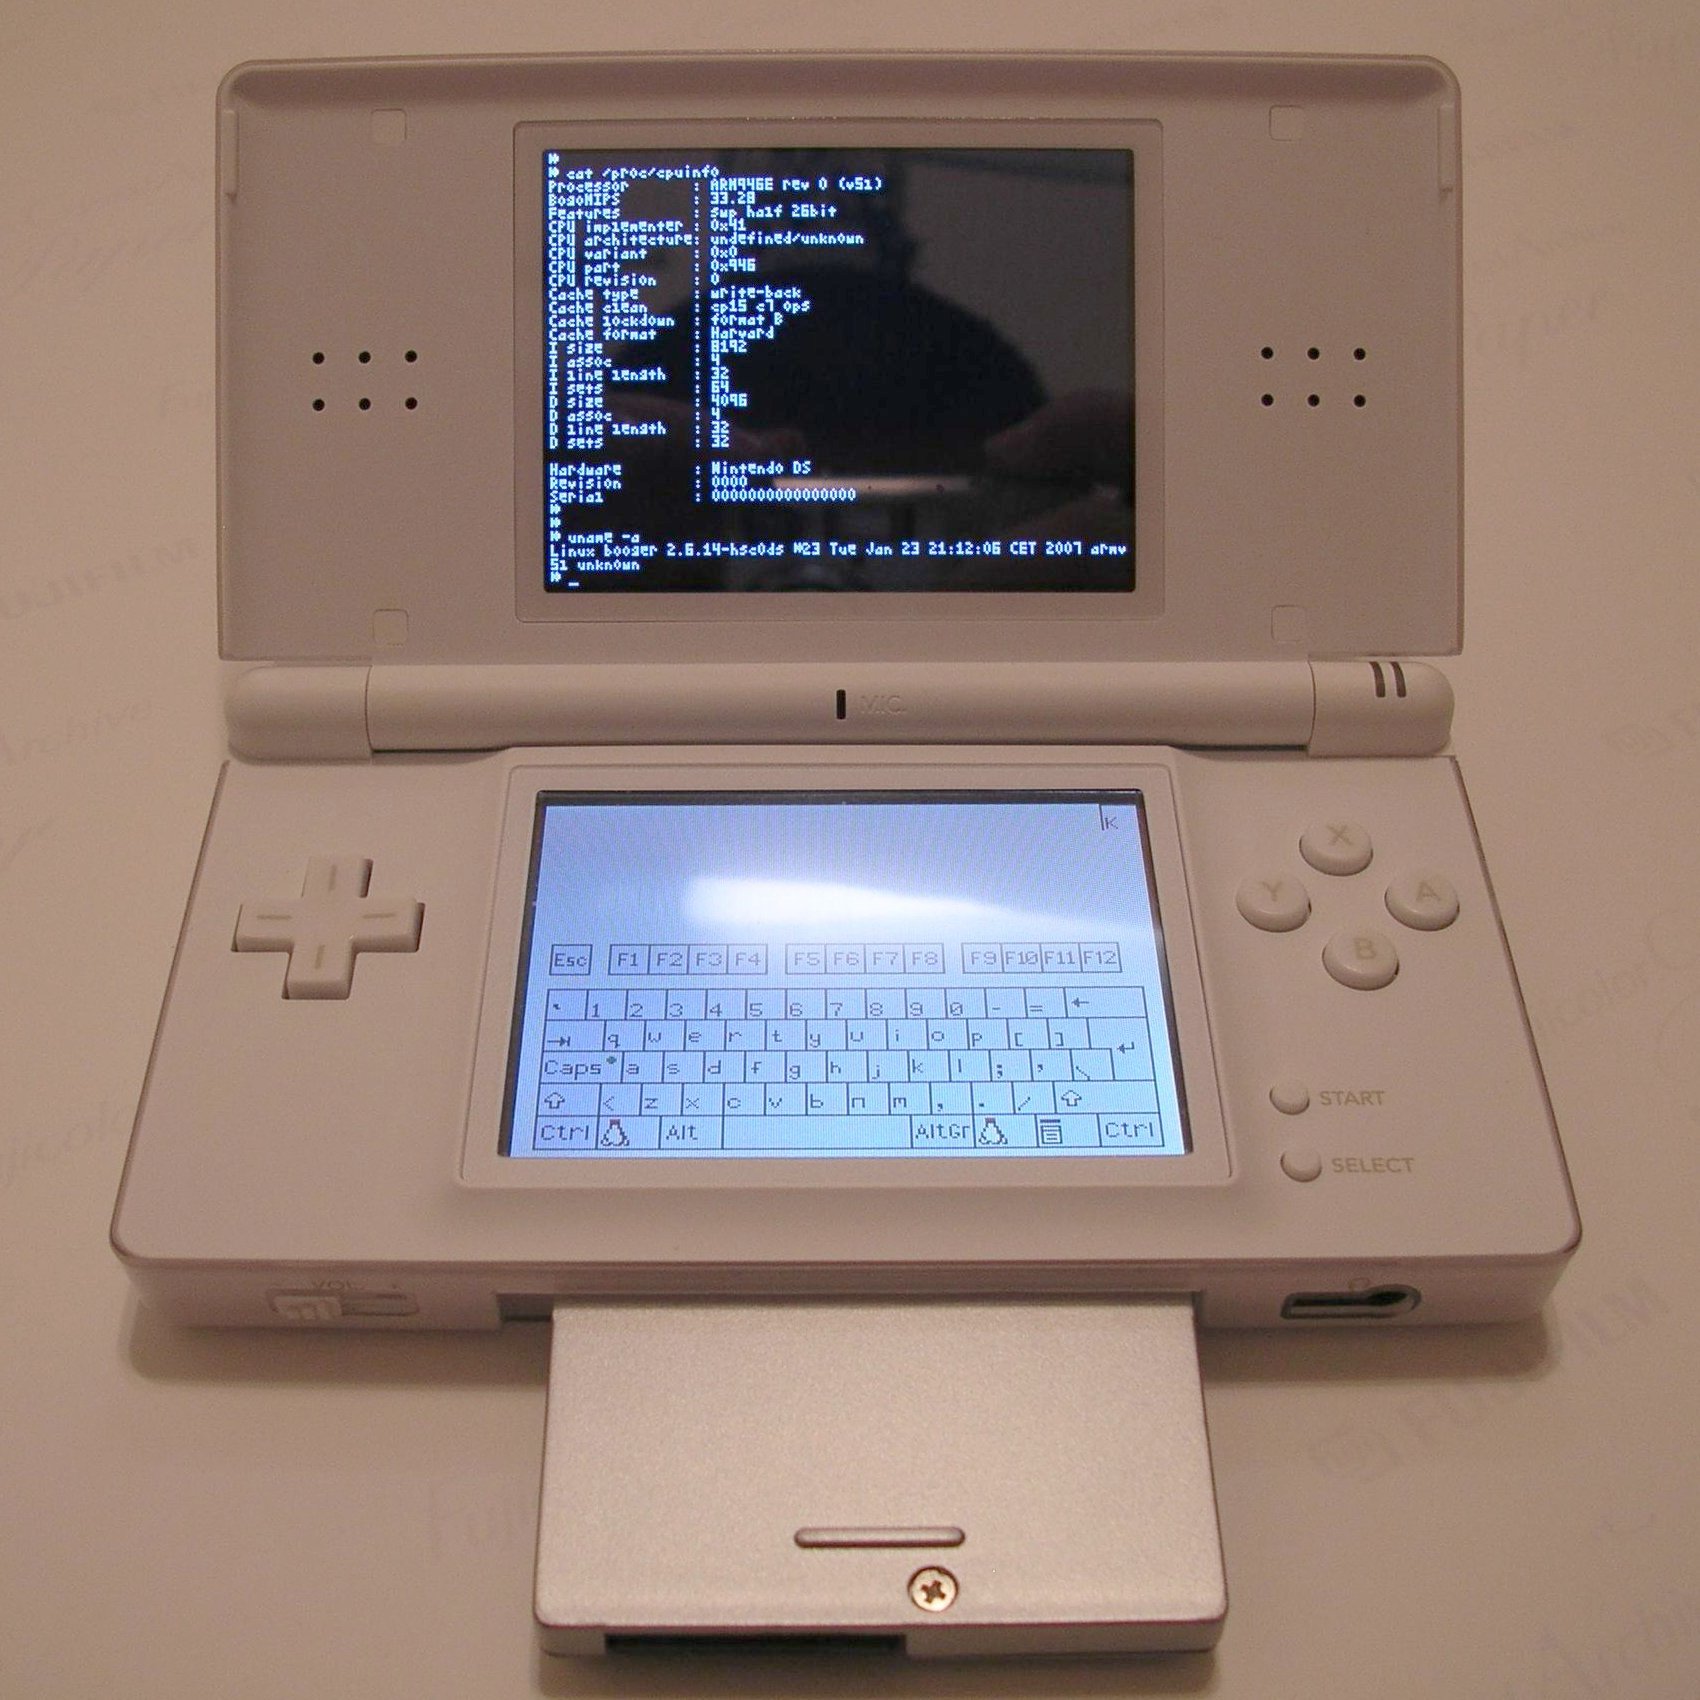 File:Ds lite with slot-2 device running dslinux.jpg - Wikimedia Commons